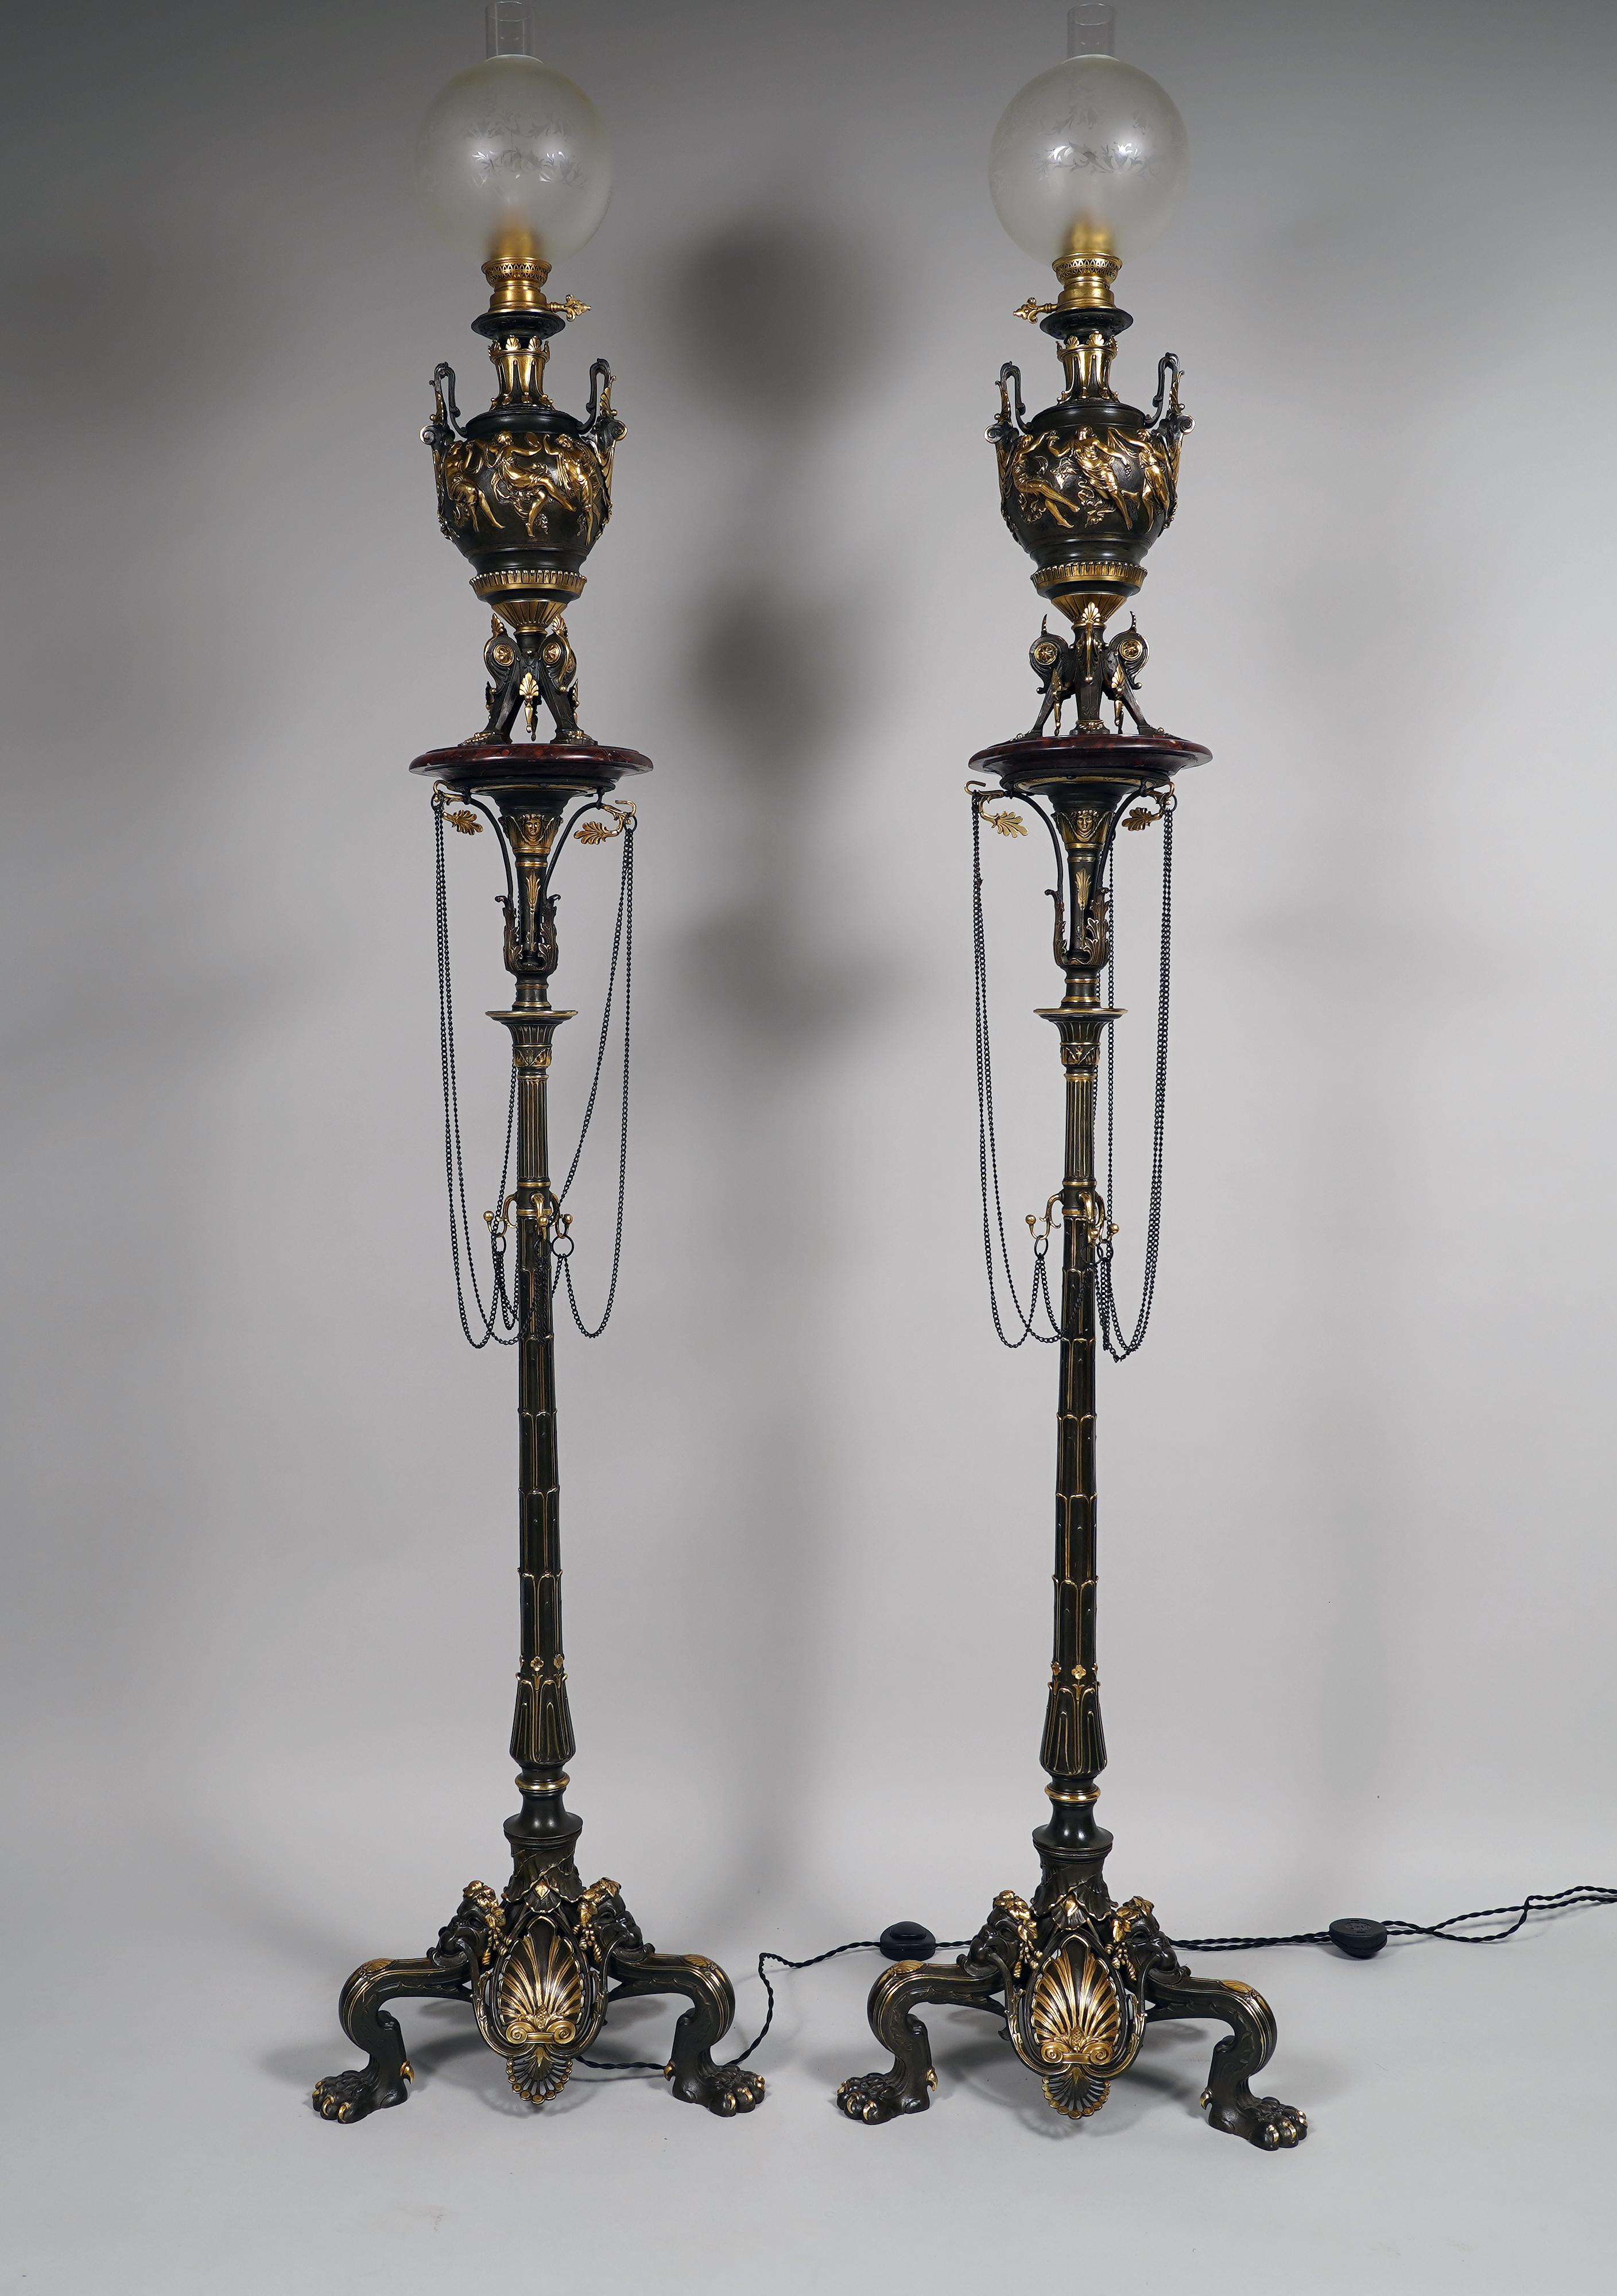 Measures : Total Height : 188,5 cm (74,2 in.) ; Base : 45 x 45 cm (17,7 x 17,7 in.)
Pedestal height : 136 cm (53,5 in.)
Lamp height : 52 cm (20,4 in.)

Beautiful pair of neo-Greek floor lamps in bronze with double patina, composed of lamps in the